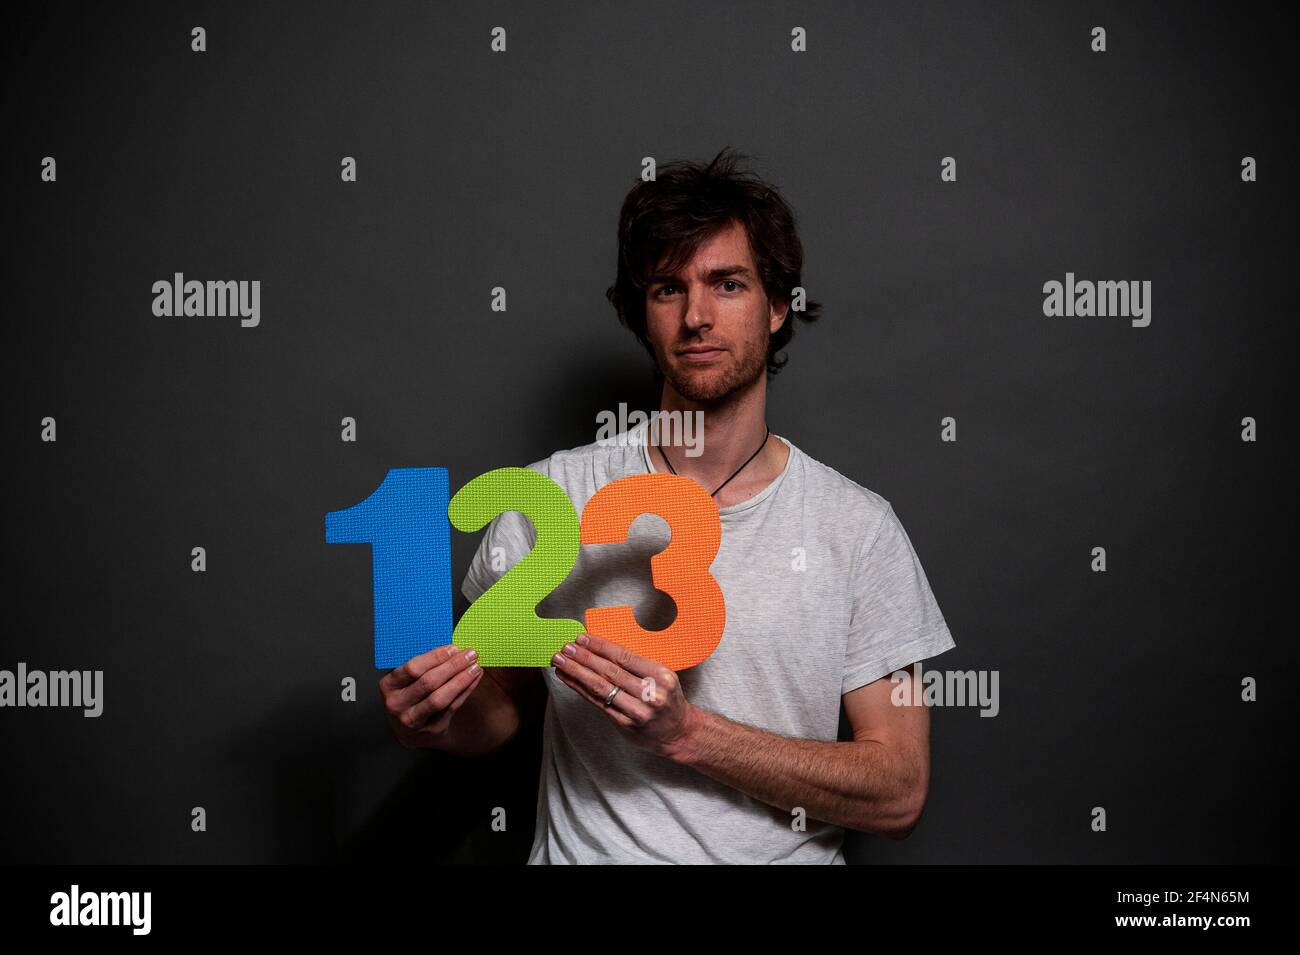 A young man wearing a white t-shirt holding up colourful foam numbers 1, 2 and 3. Stock Photo